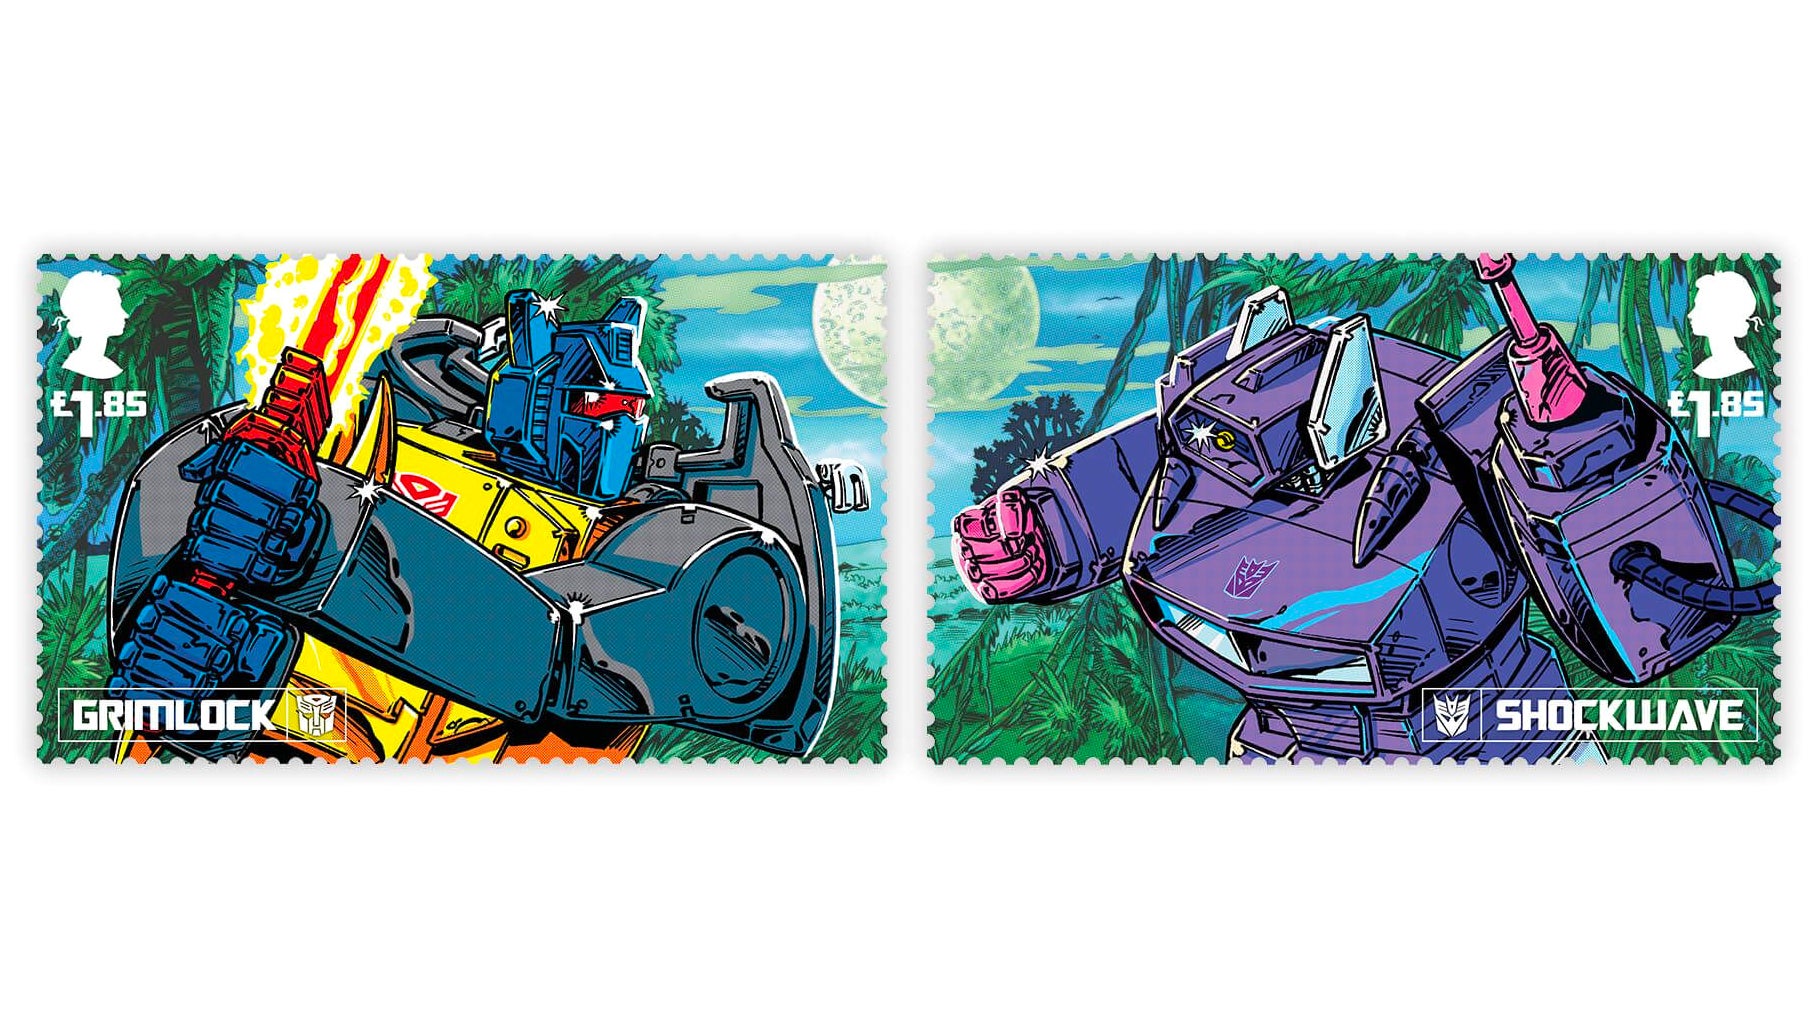 Like the Transformers, These New Stamps Reveal More Than Meets The Eye